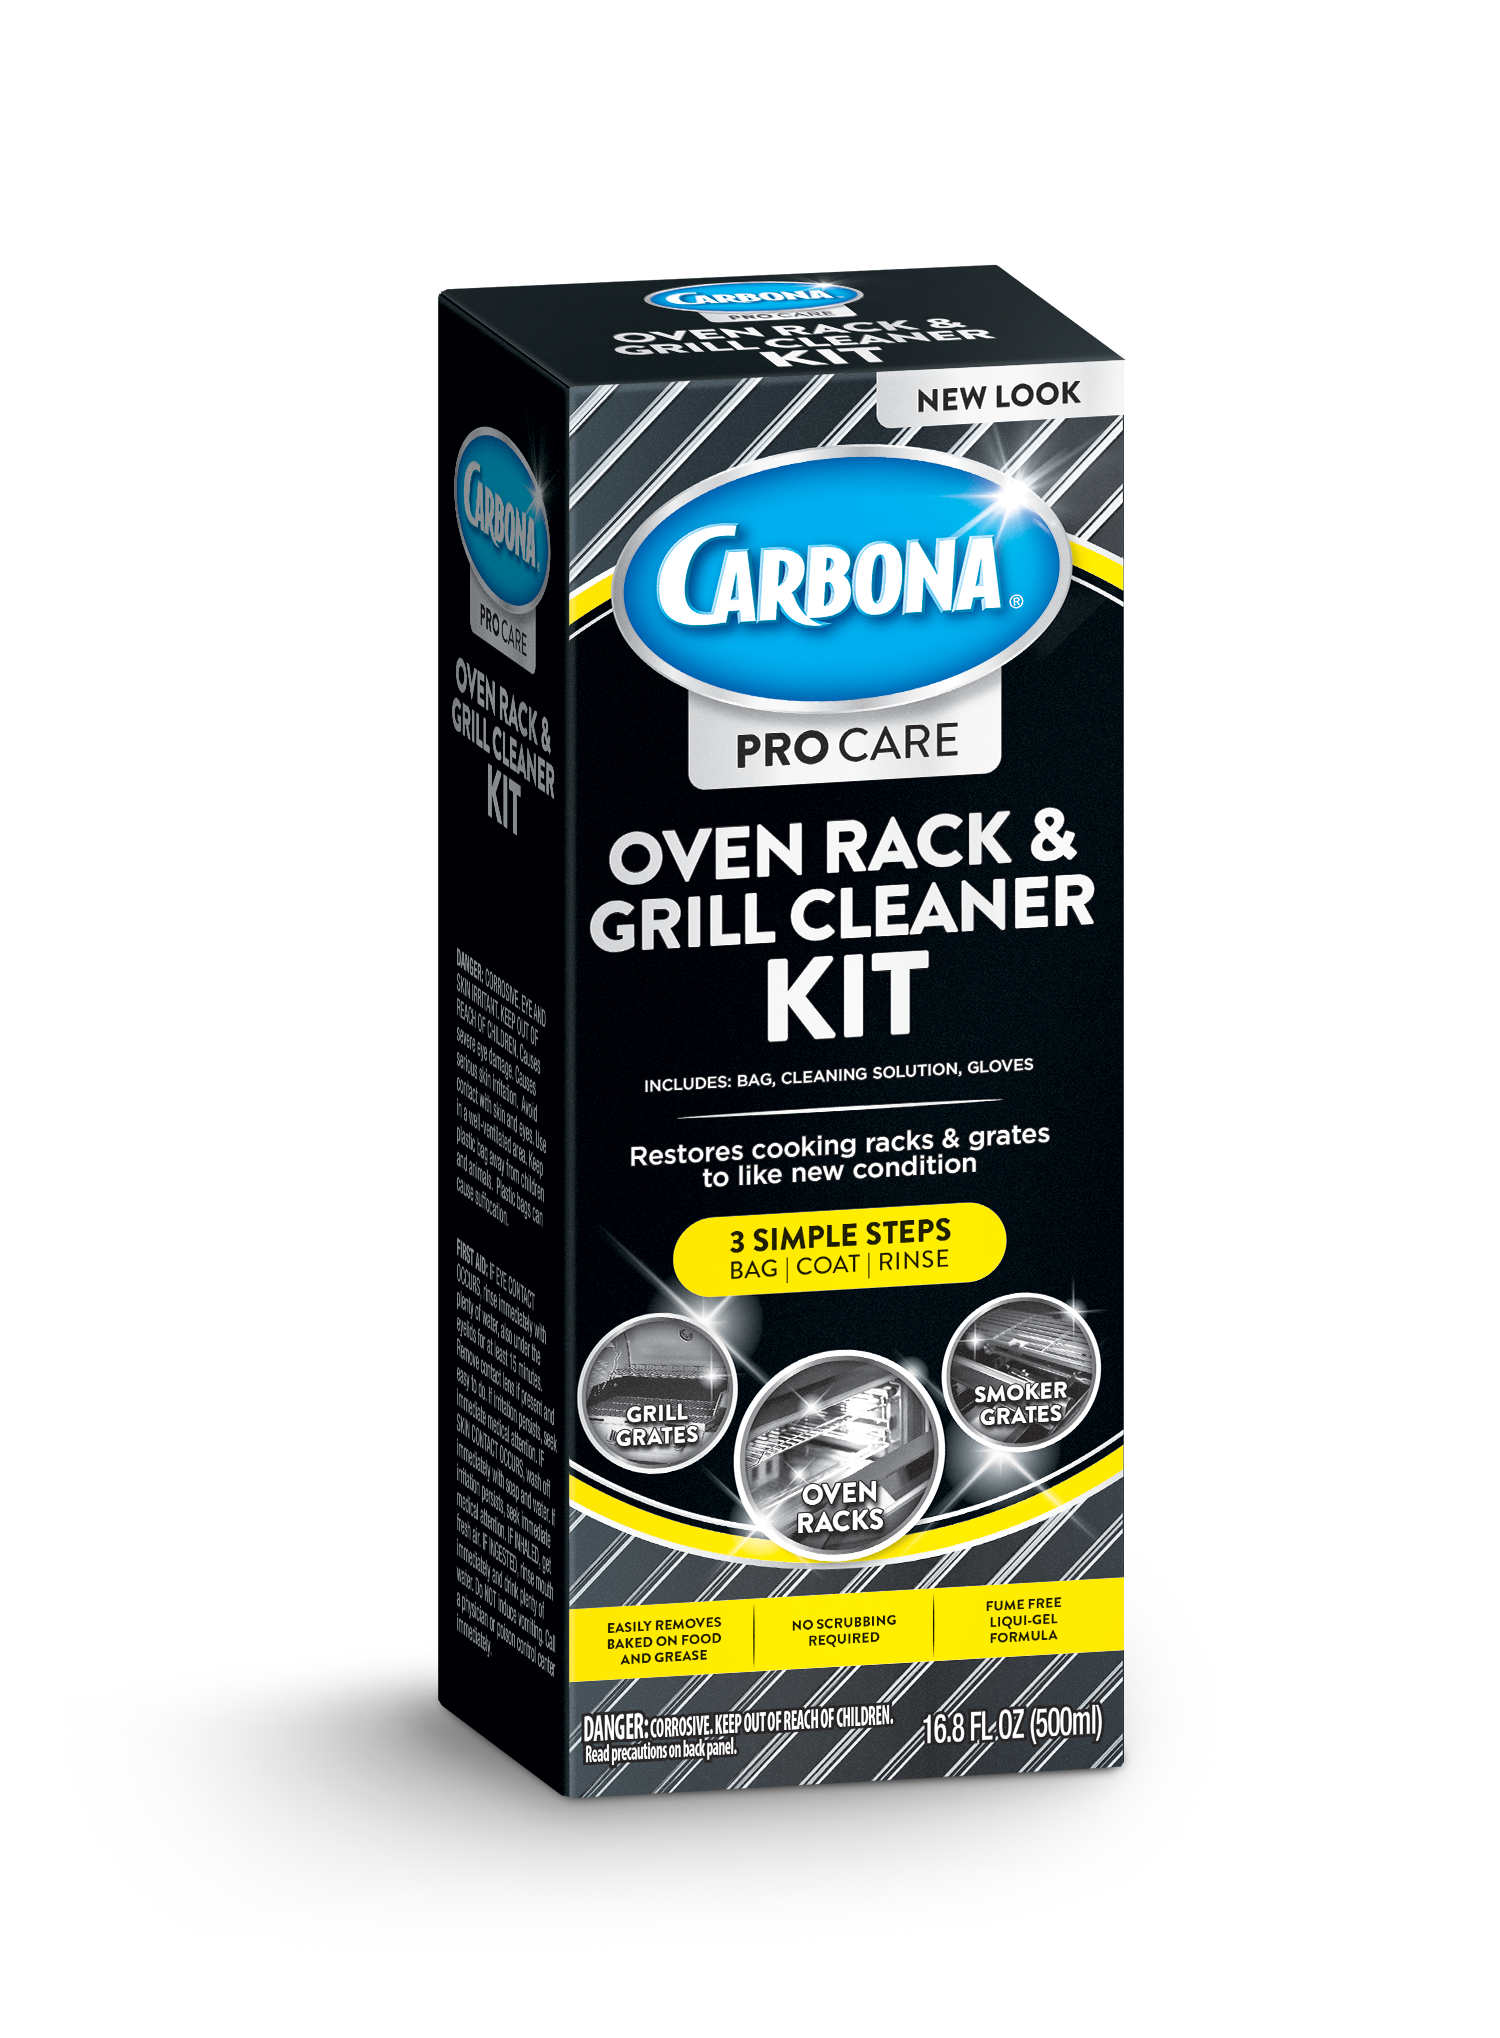 Cleaning　Grill　Products　Cleaner　Carbona　Oven　Rack